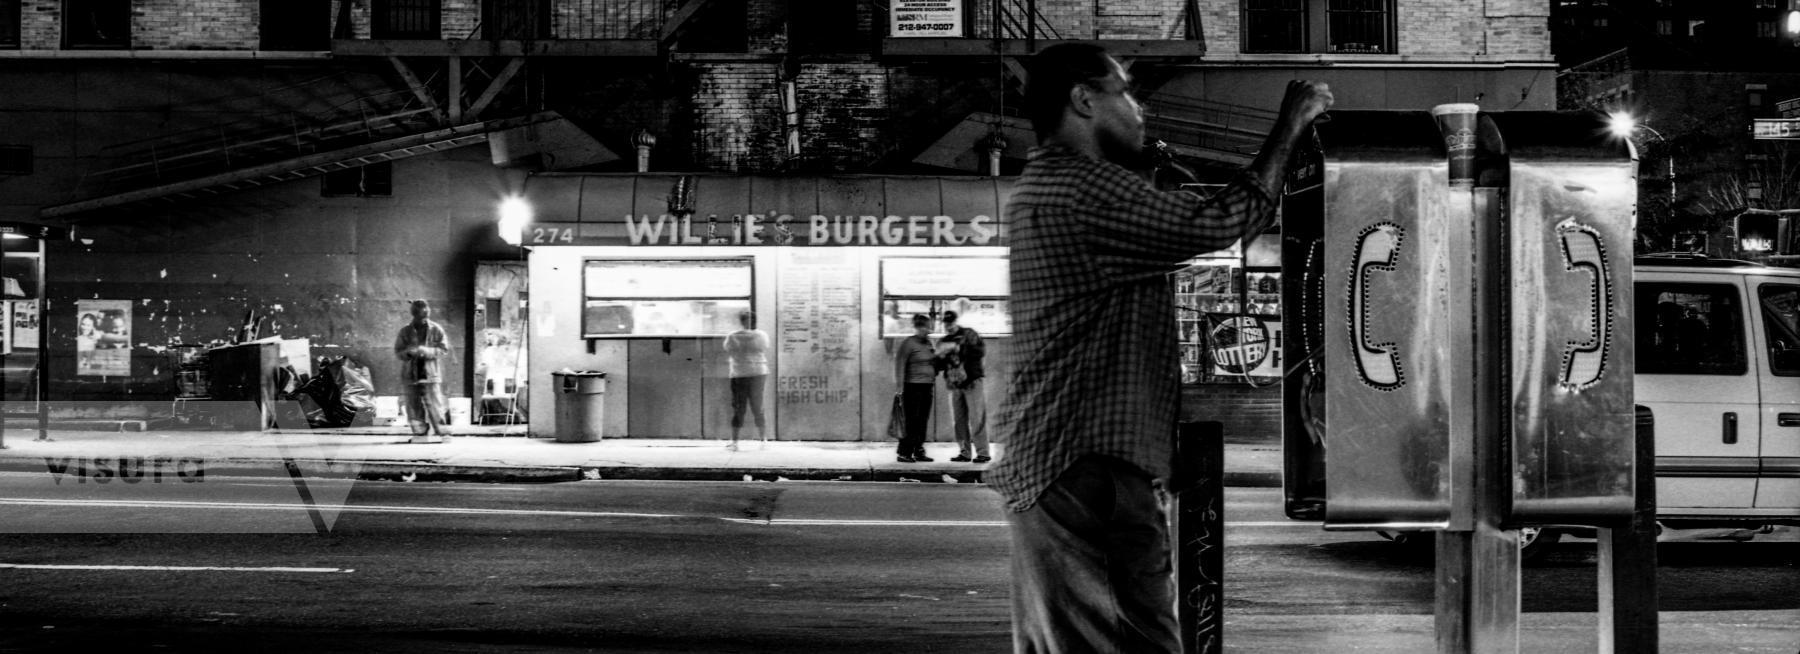 Purchase Willie's Burgers, August 2002 by Kenneth Nelson